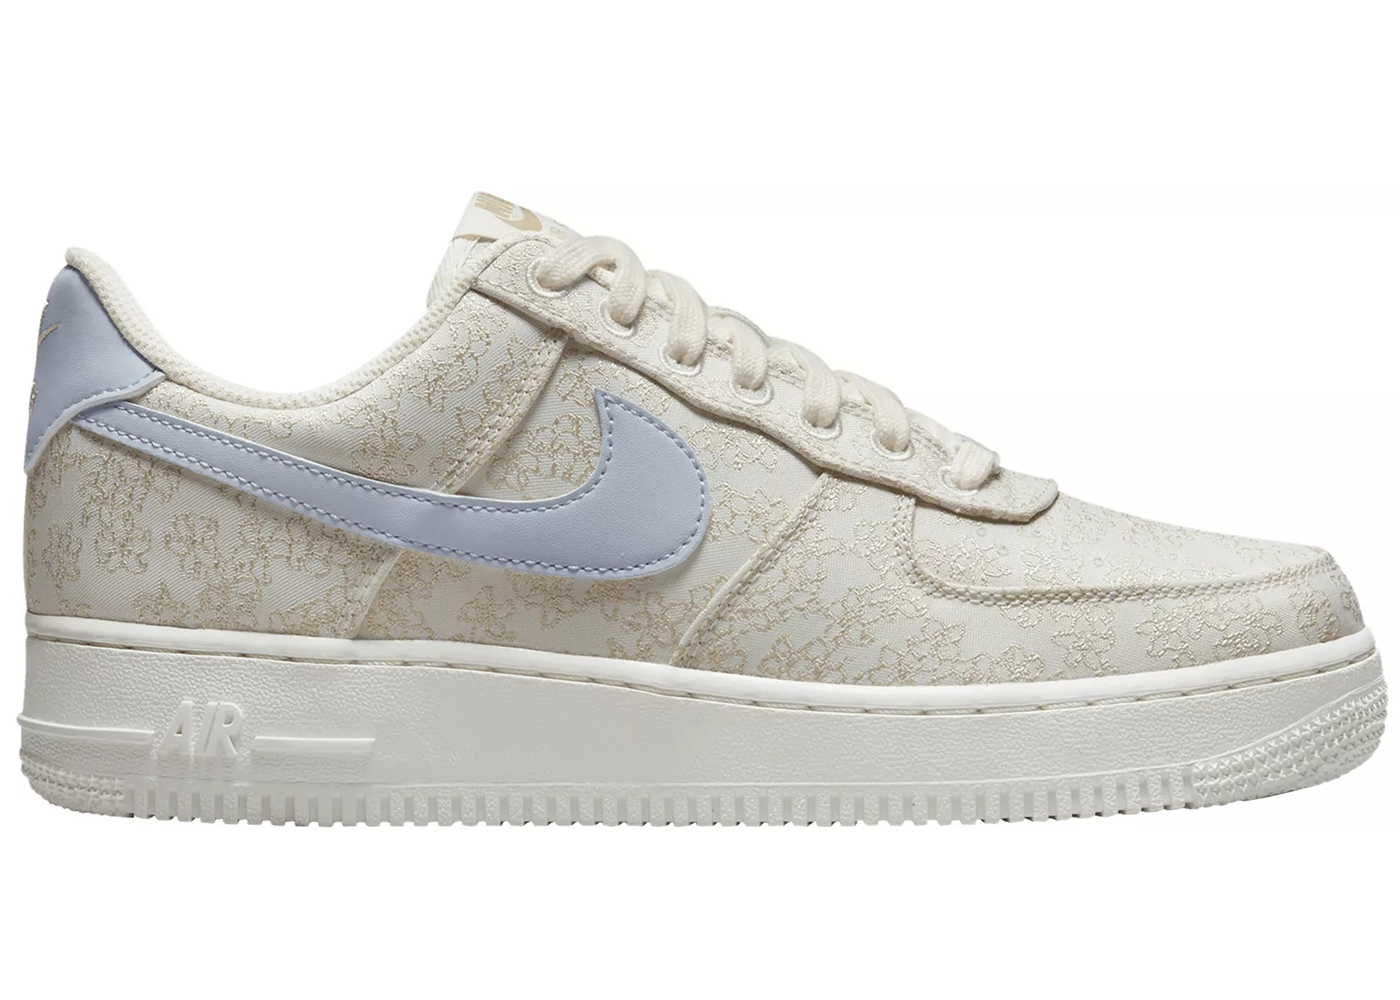 Nike Air Force 1 Low '07 SE Jacquard Floral Embroidery (Women's